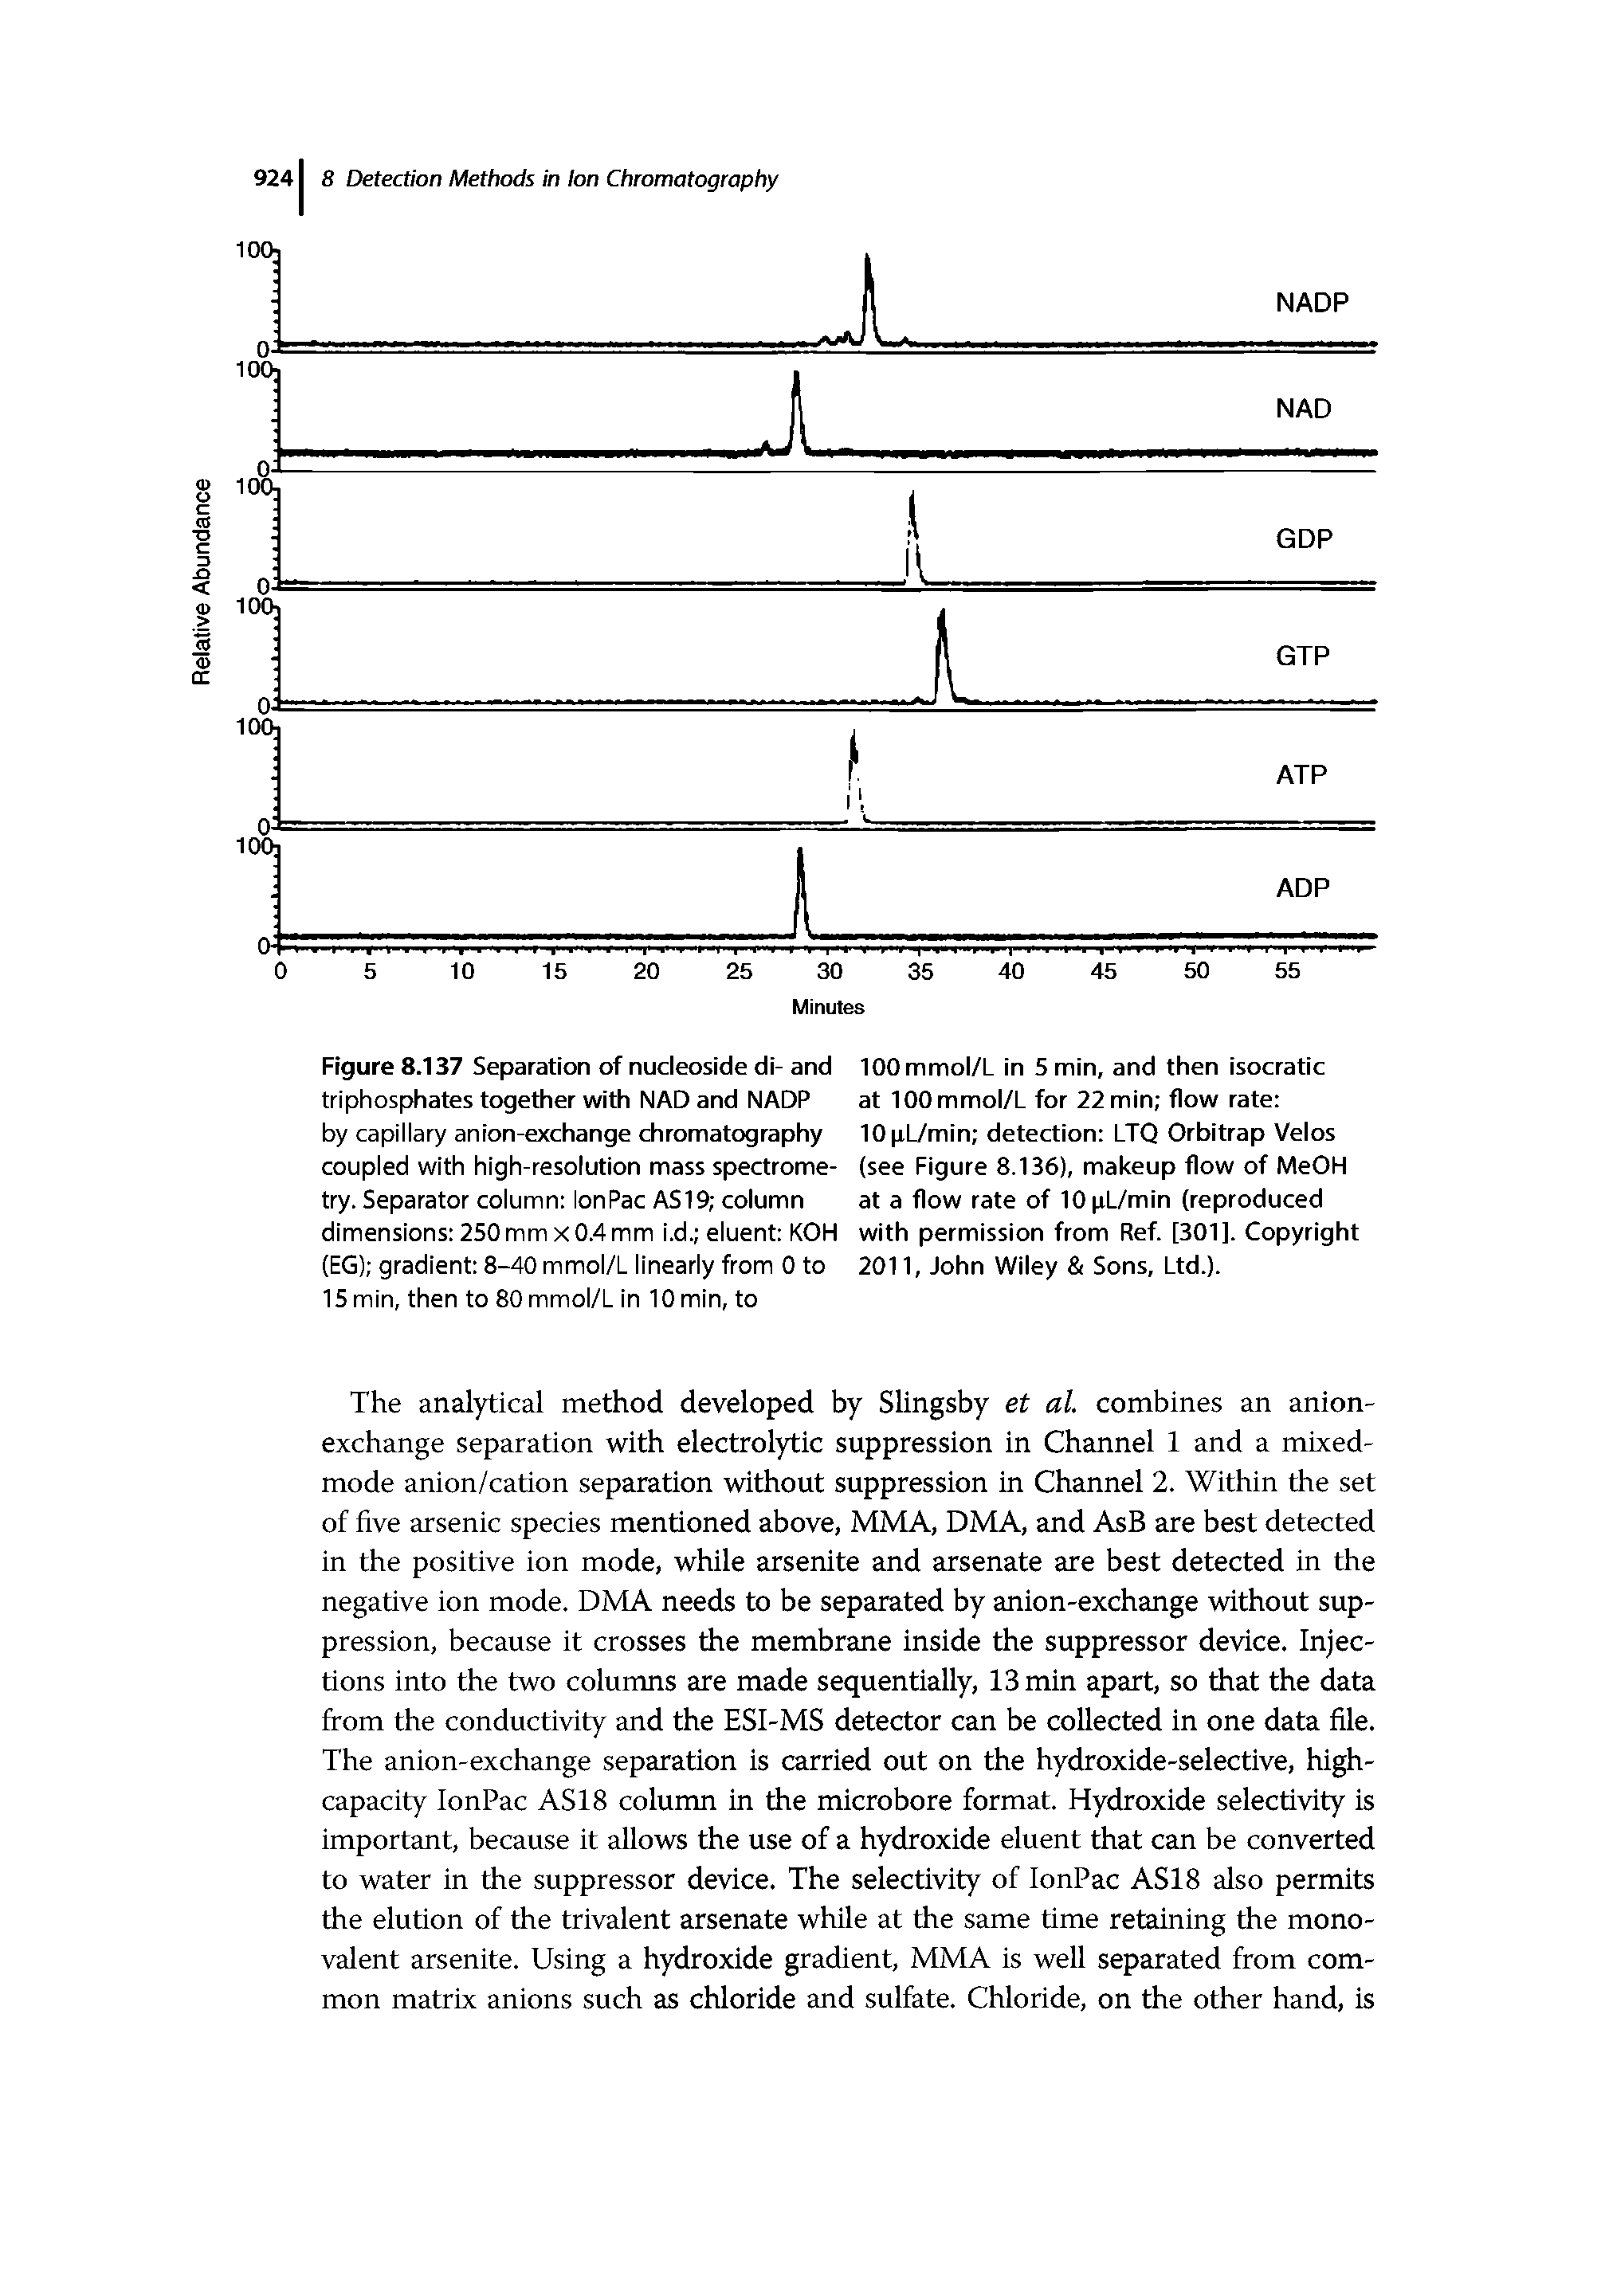 Figure 8.137 Separation of nucleoside di- and triphosphates together with NAD and NADP by capillary anion-exchange chromatography coupled with high-resolution mass spectrometry. Separator column lonPac AS19 column dimensions 250 mm x 0.4 mm i.d. eluent KOH (EG) gradient 8-40 mmol/L linearly from 0 to 15 min, then to 80 mmol/L in 10 min, to...